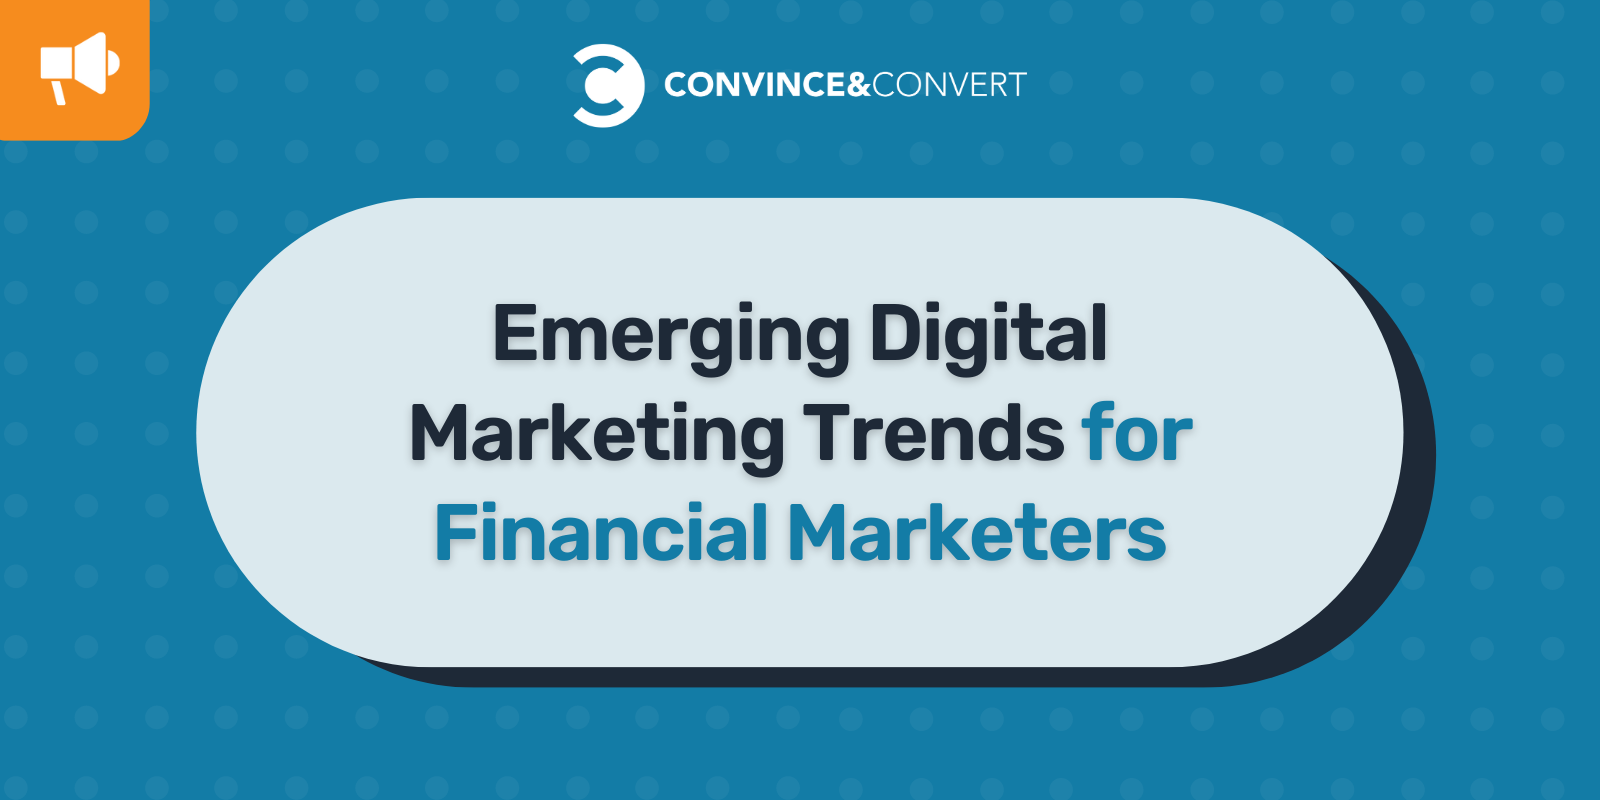 You are currently viewing Emerging Digital Marketing Trends for Financial Marketers